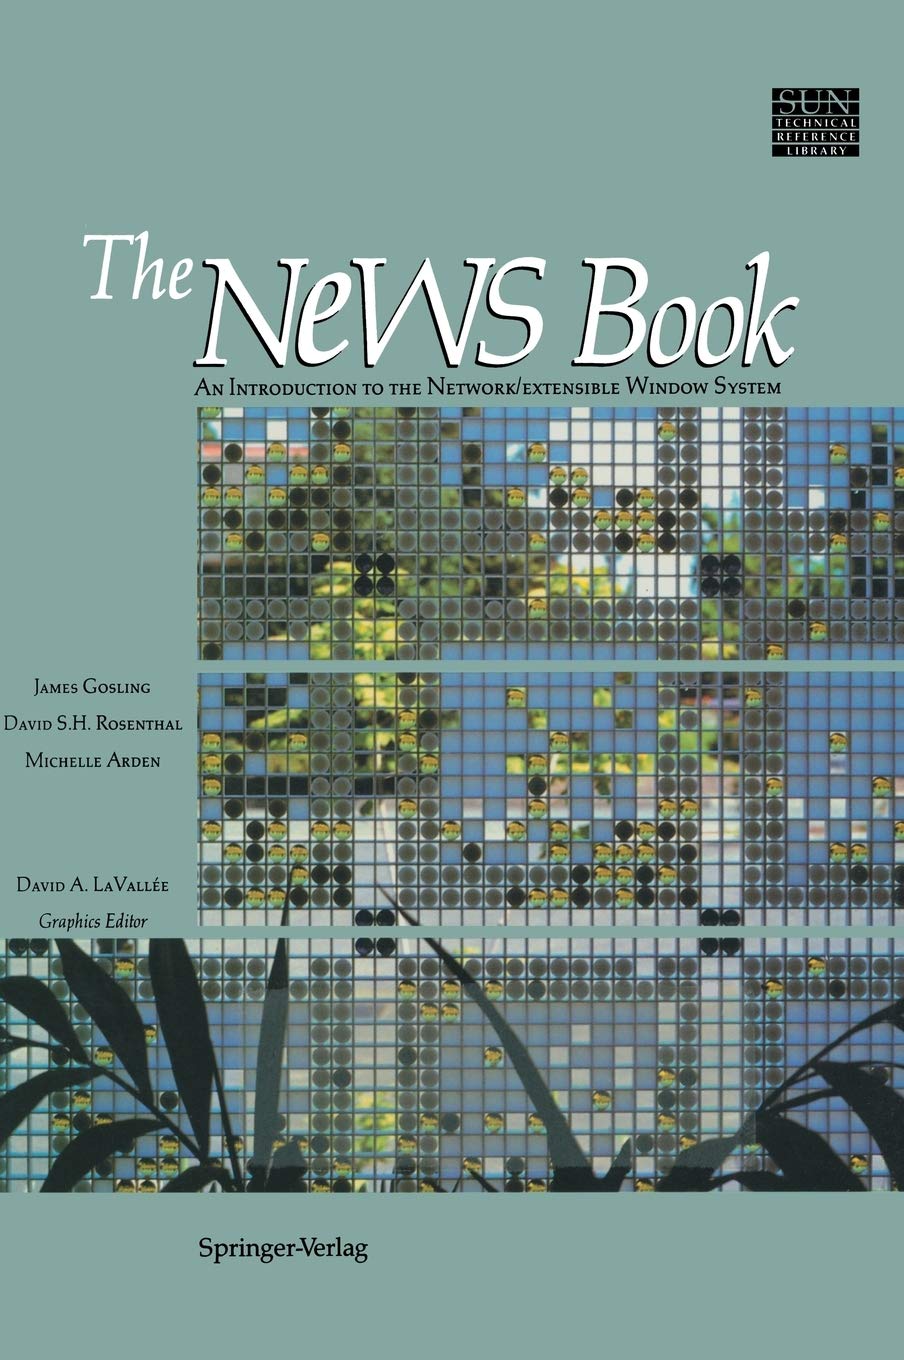 The NeWS Book: An Introduction to the Network/Extensible Window System (Sun Technical Reference Library)